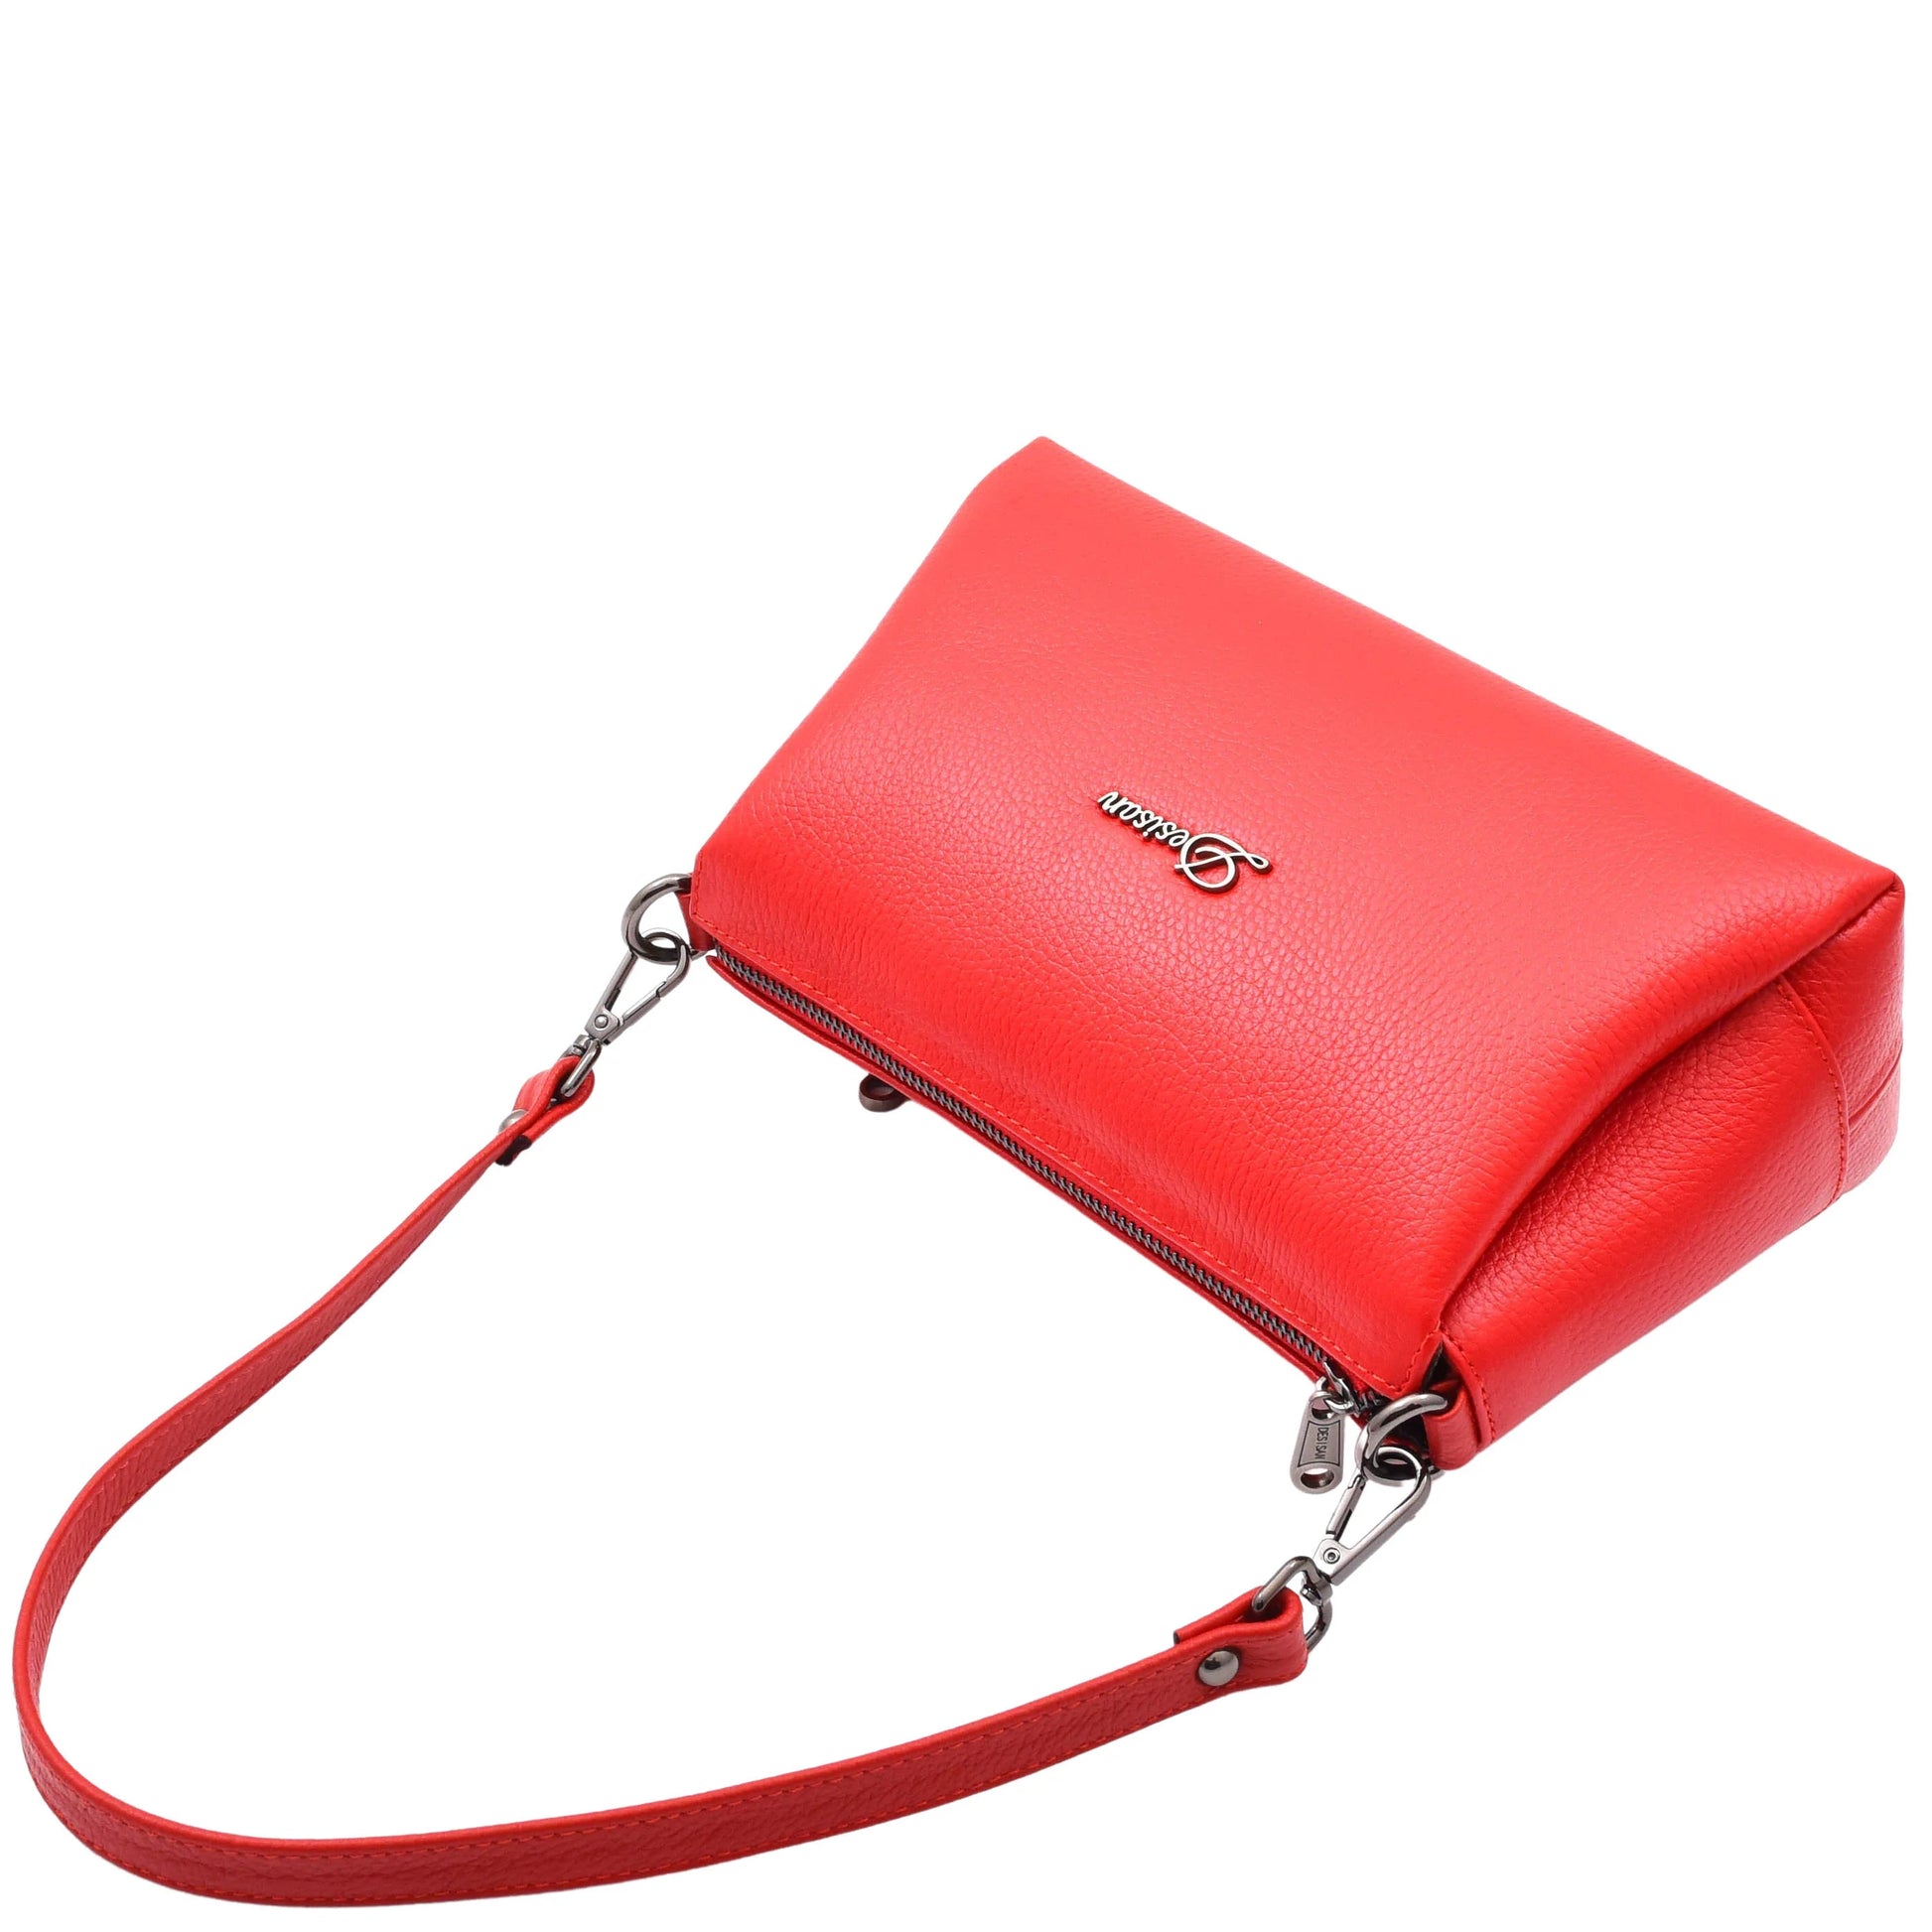 Womens Real Leather Shoulder Zip Bag Small Size Handbag Chelo Red